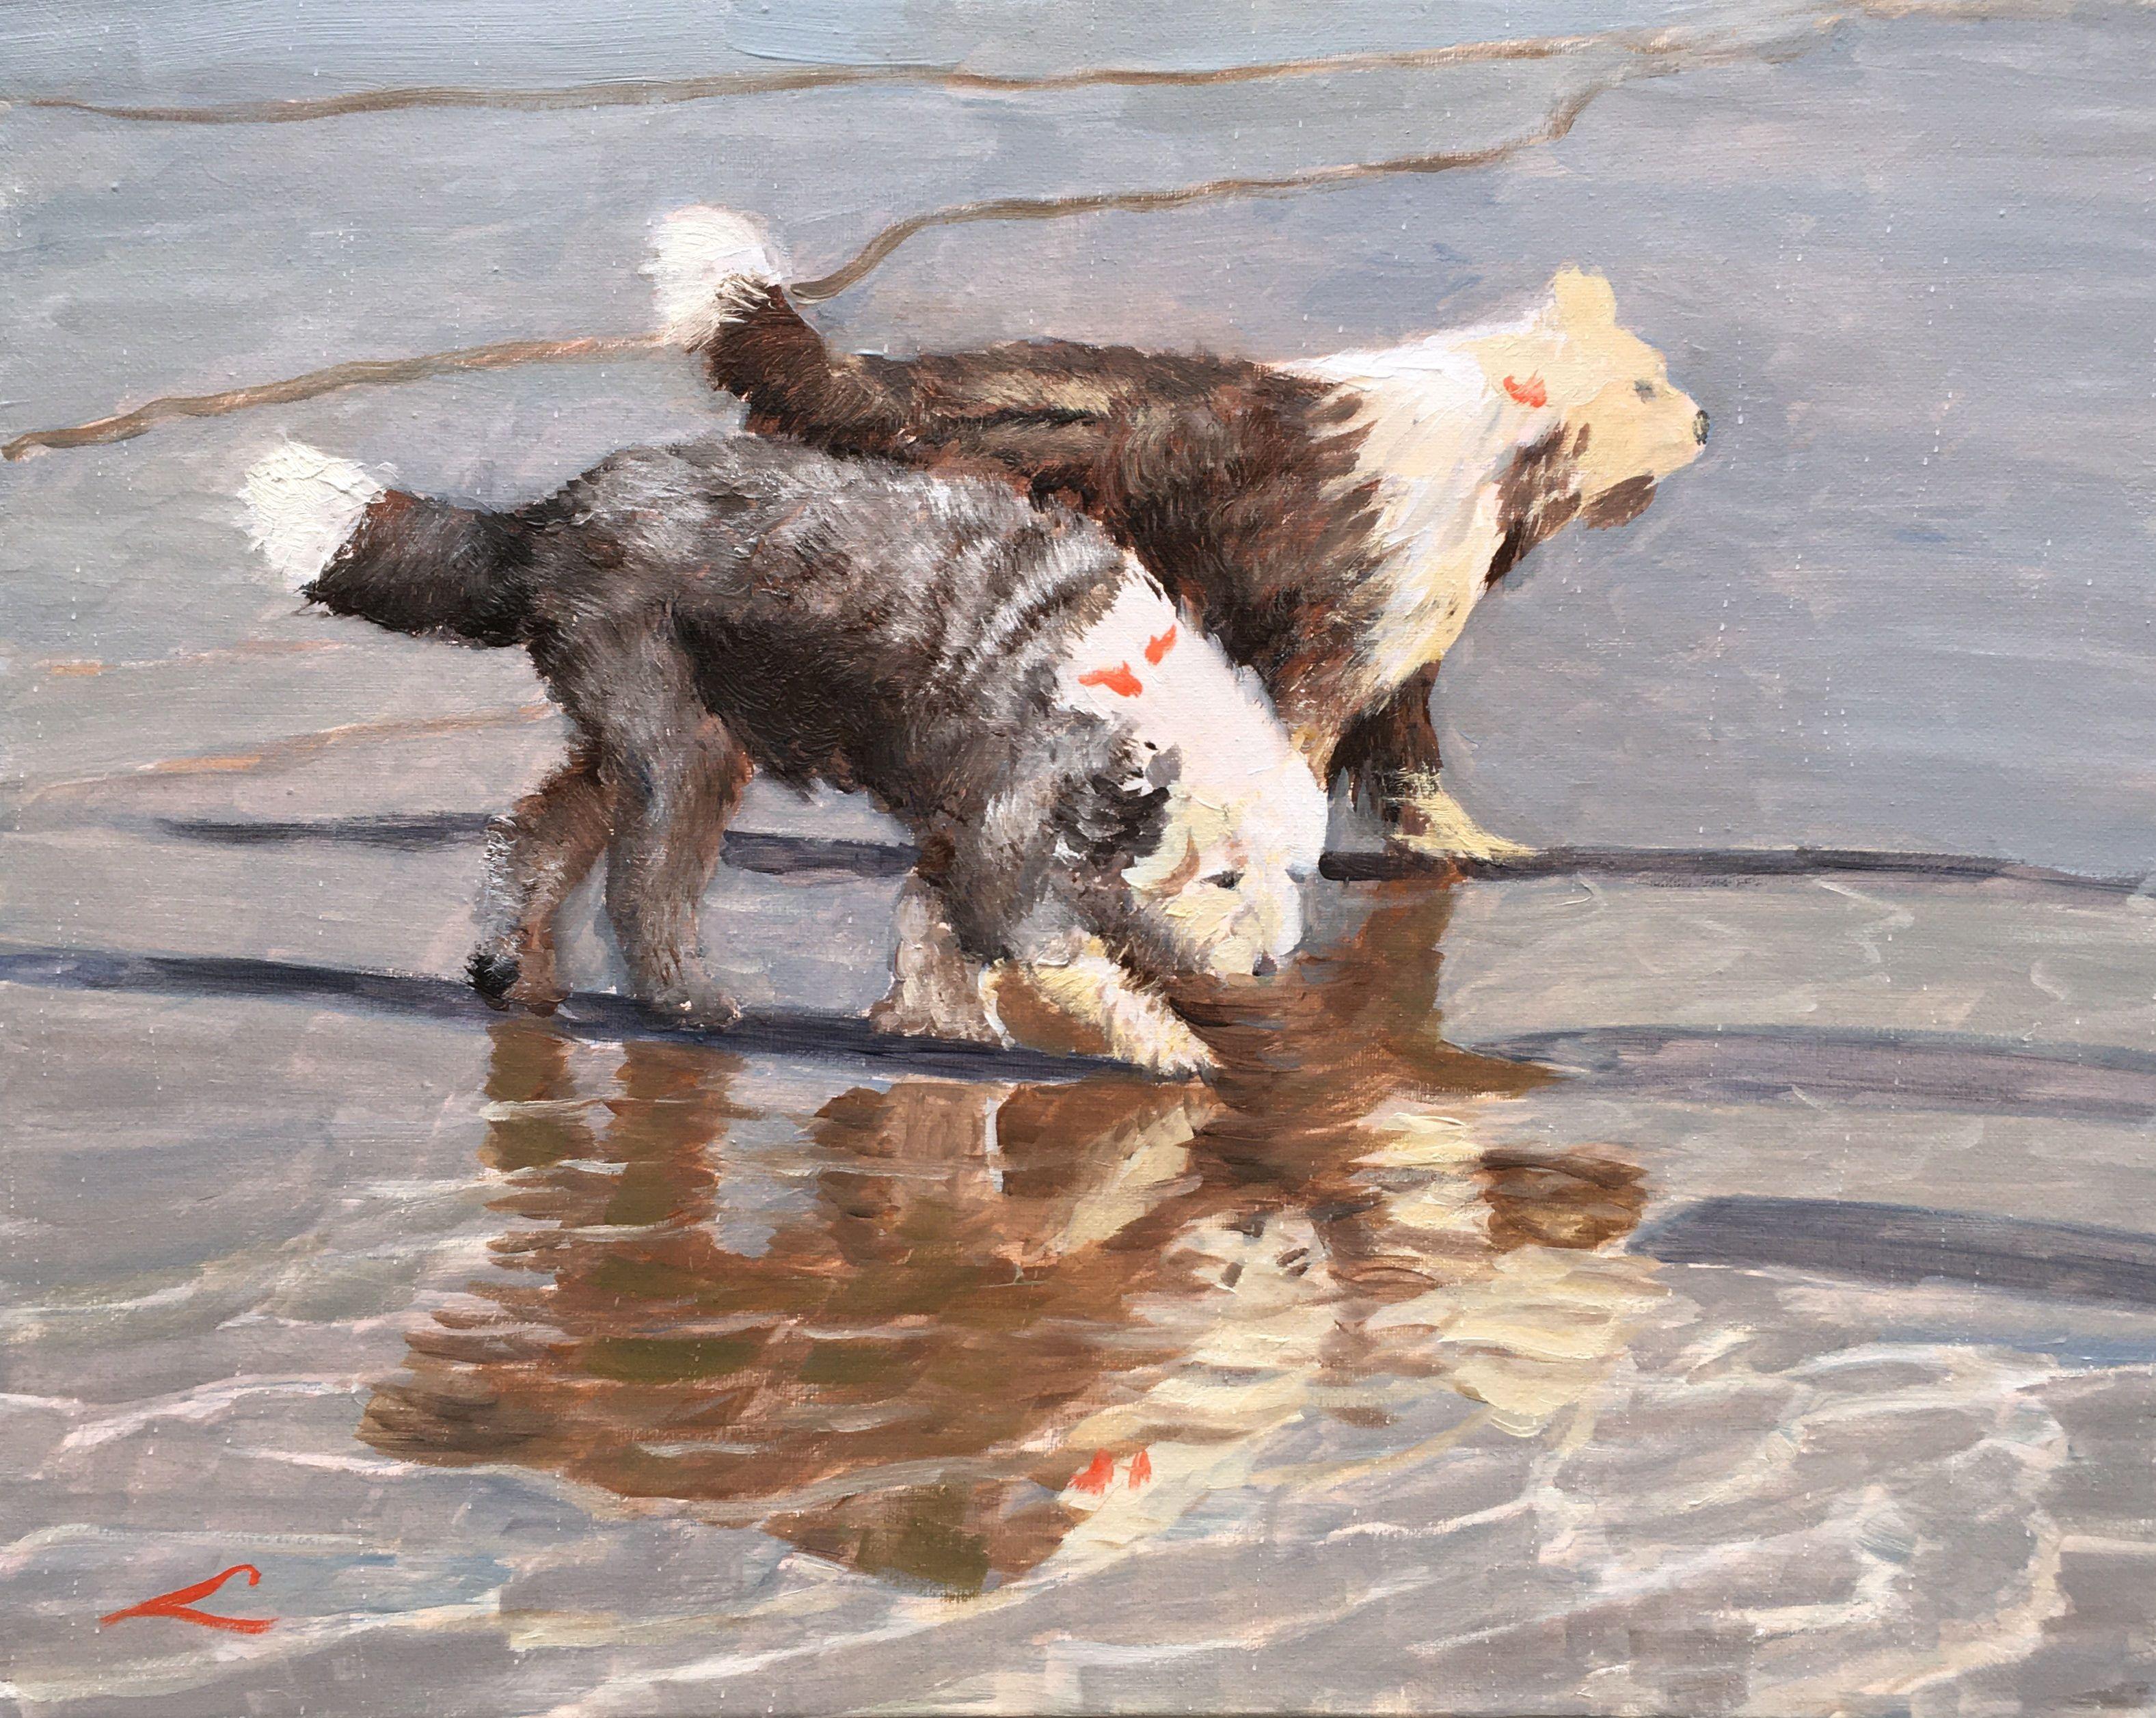 Dogs at the sea. Alla prima oil painting with few final taches when dry. Beautiful weather with a big shining sun. And Iâ€™m standing there taking it all in. The many spectacular sights jump at my eyes. Kids and dogs run around and splash each other